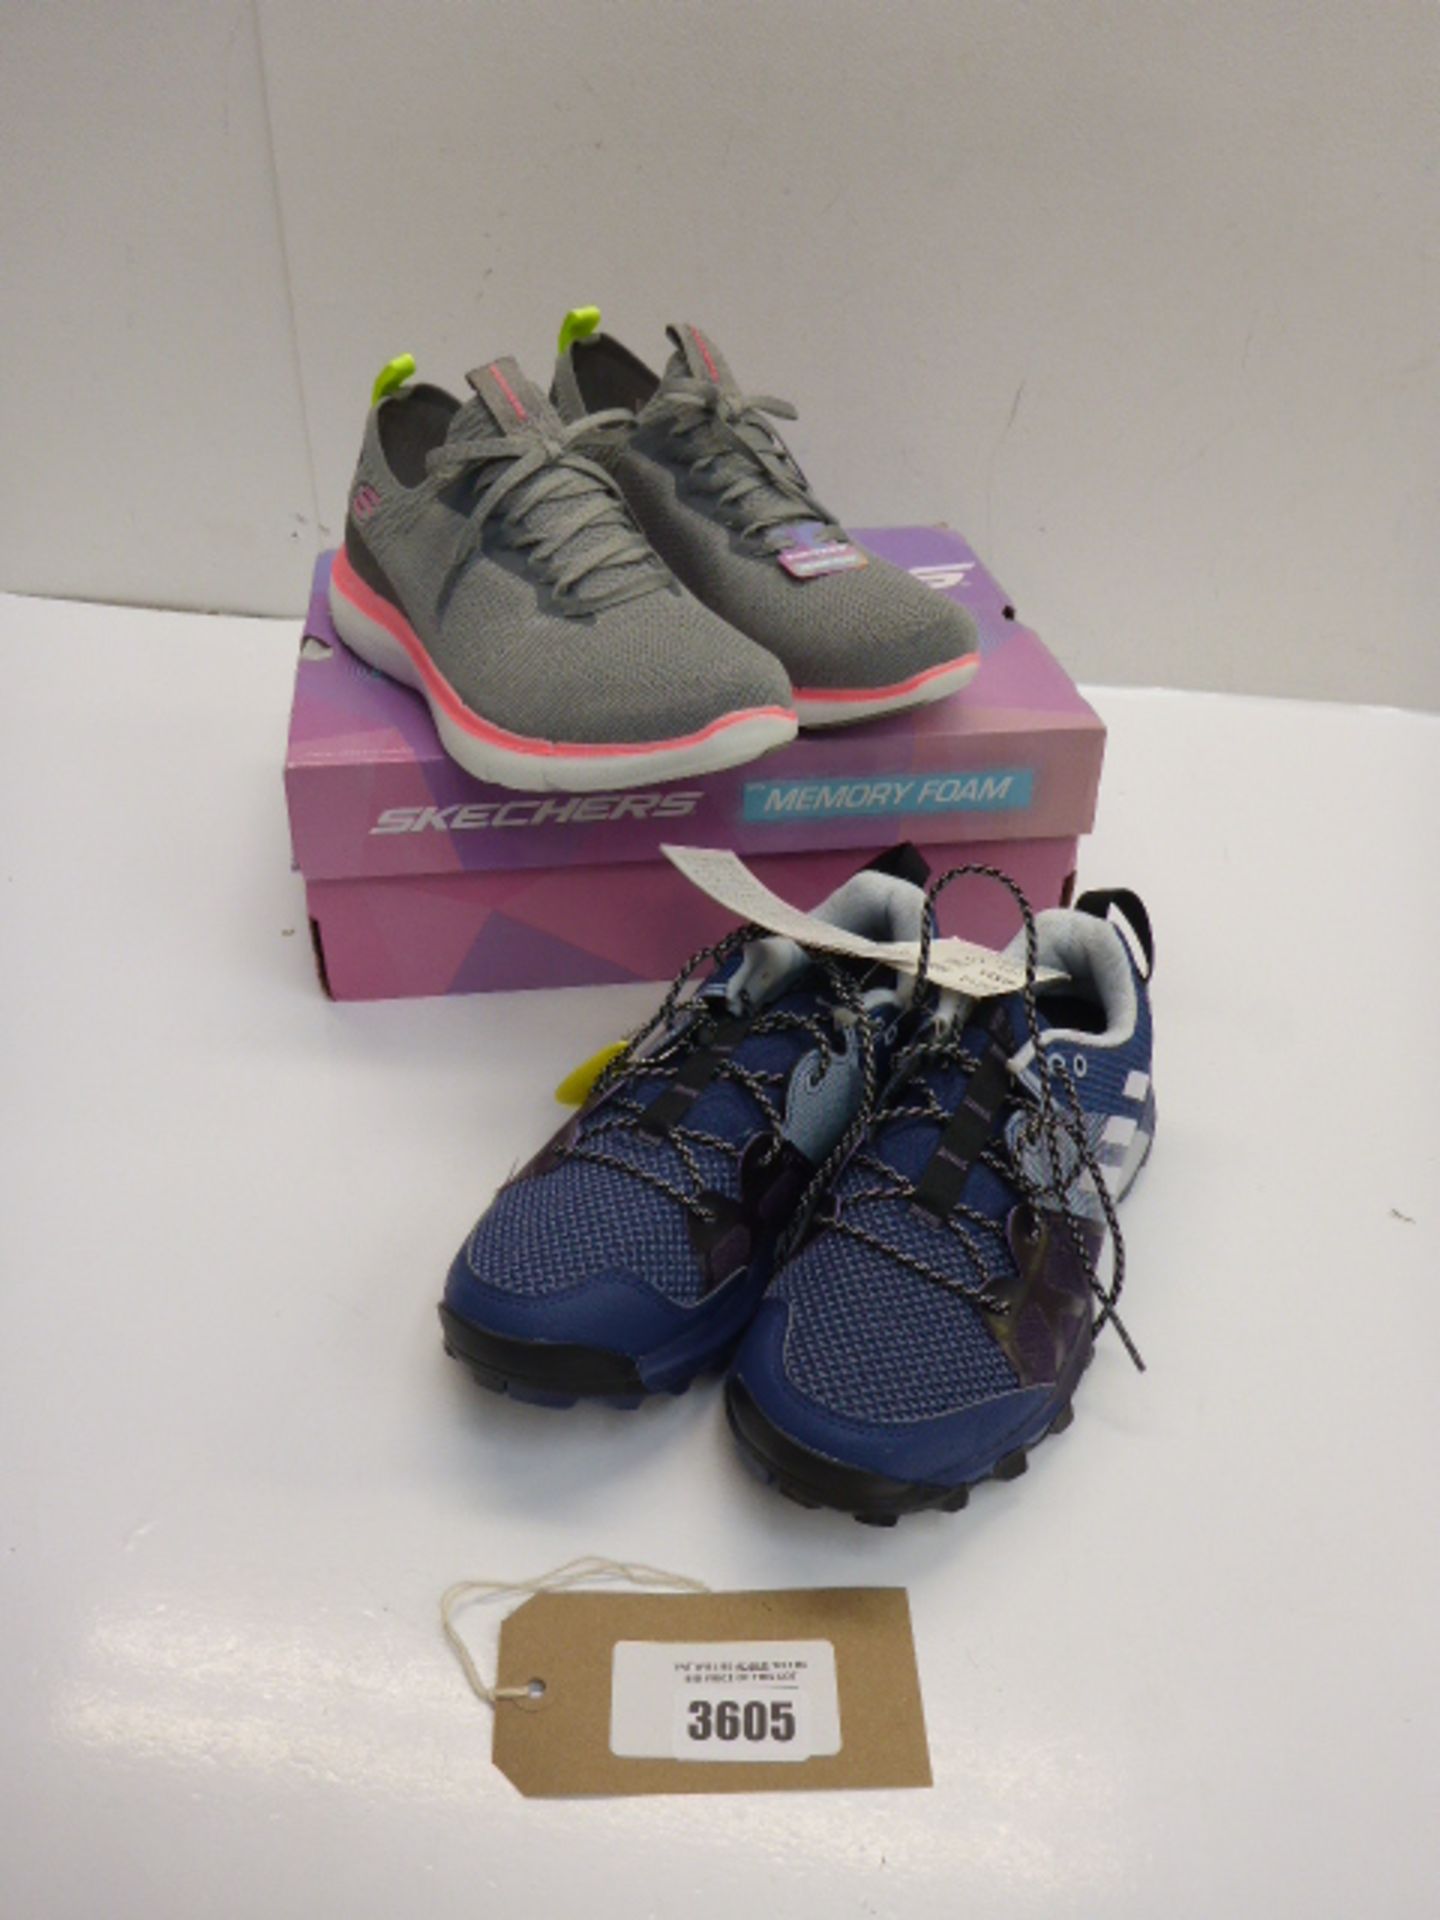 grey/pink Sketchers memory foam trainers UK 8 and a pair of Orthiolite Adidas trainers in blue UK